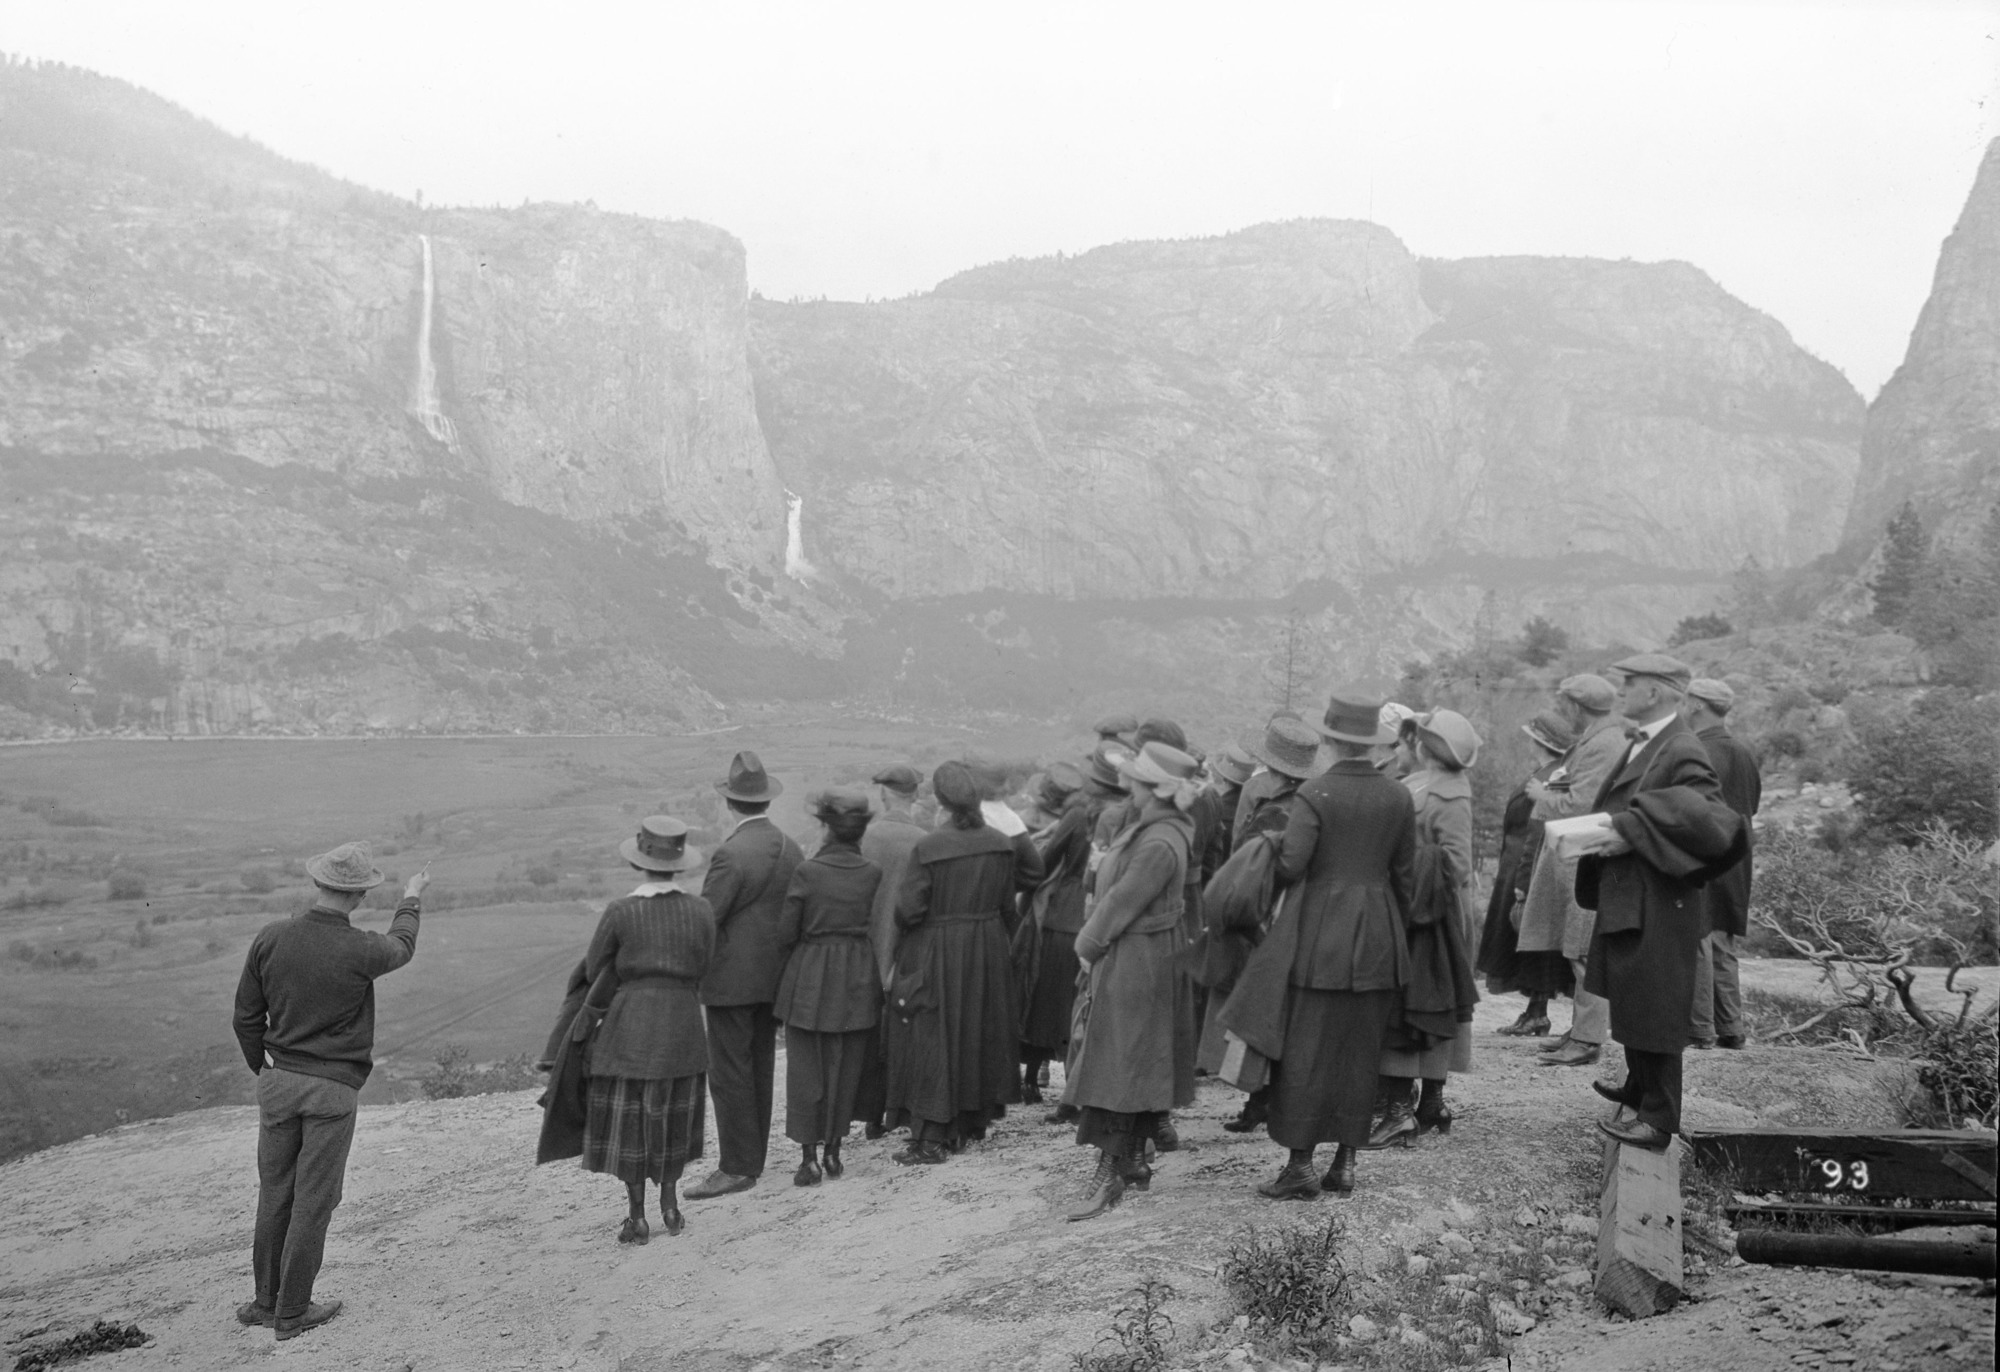 Hetch Hetchy Valley prior to reservoir showing party of visitors viewing valley.